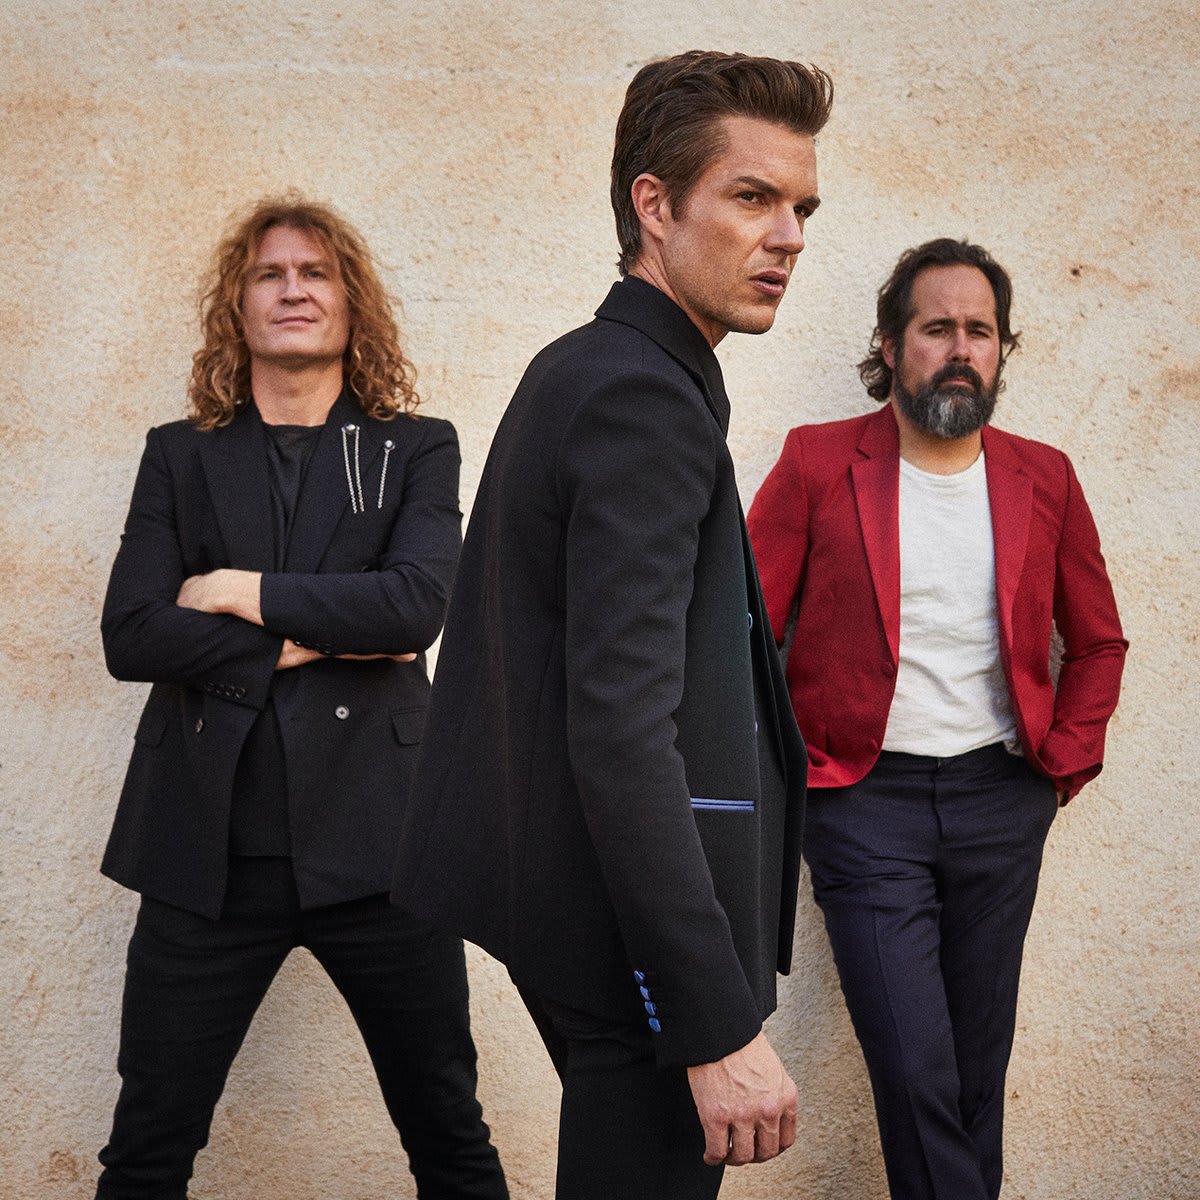 NowPlaying: The Killers' "Pressure Machine" expresses the conflicting consequences and prosperities of small town living through Flowers' goosebump-inducing falsetto.